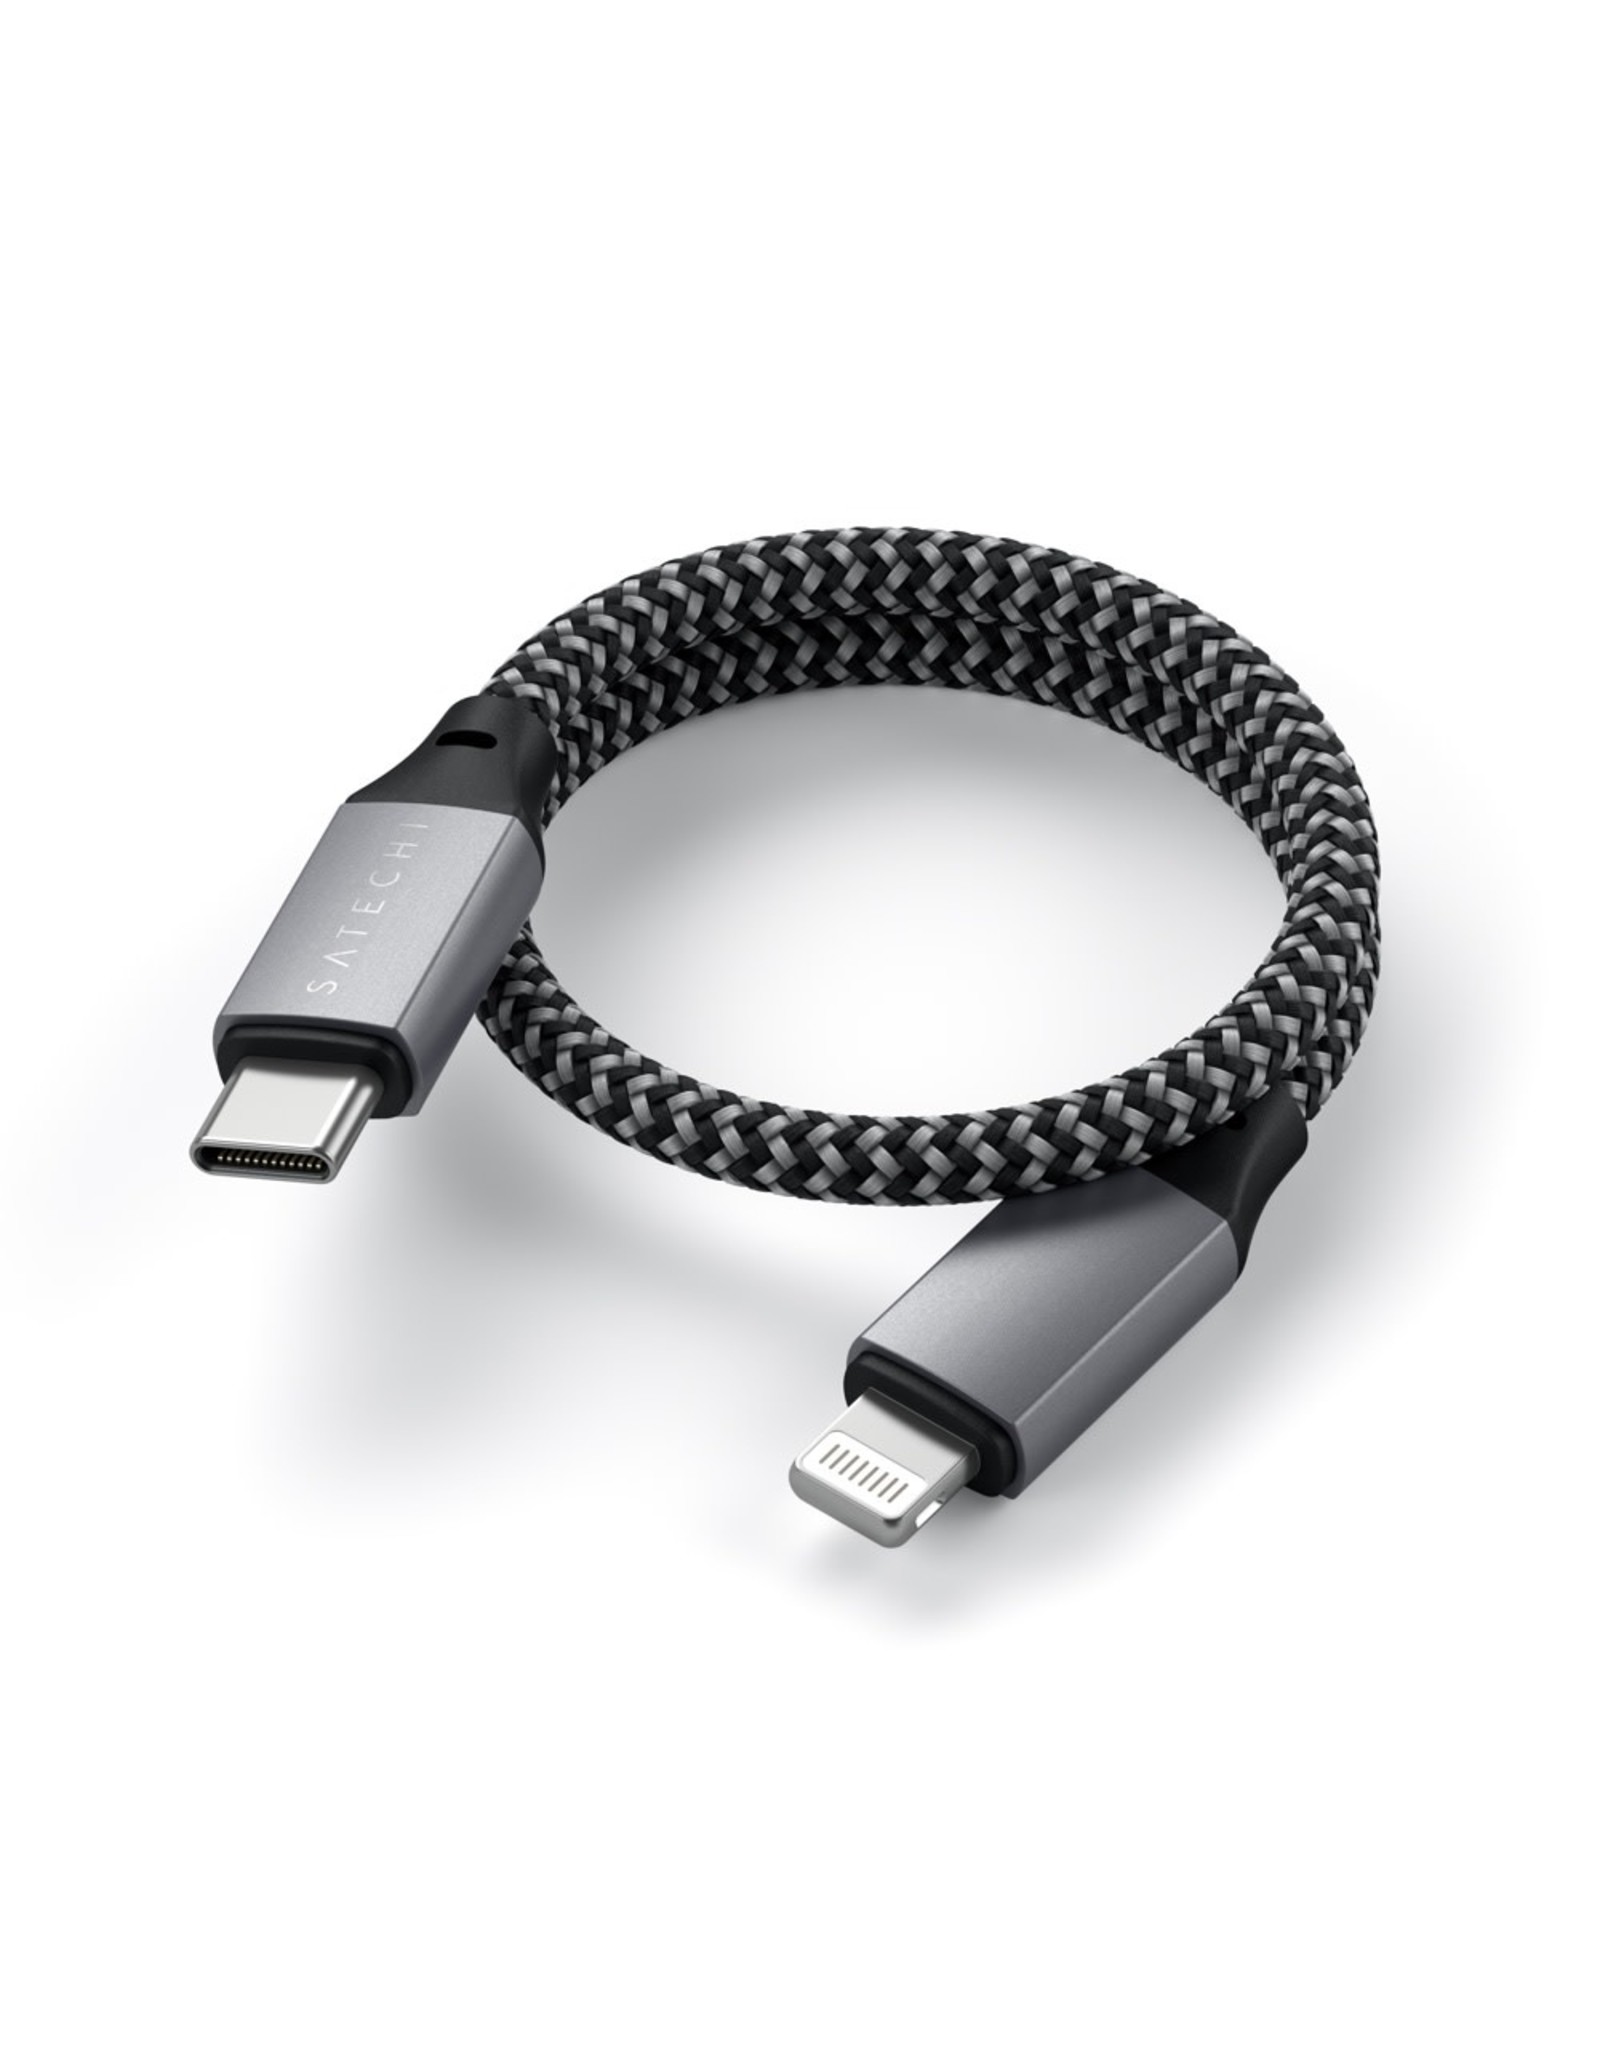 Satechi Satechi USB-C to Lightning Short Cable 25cm - Space Grey